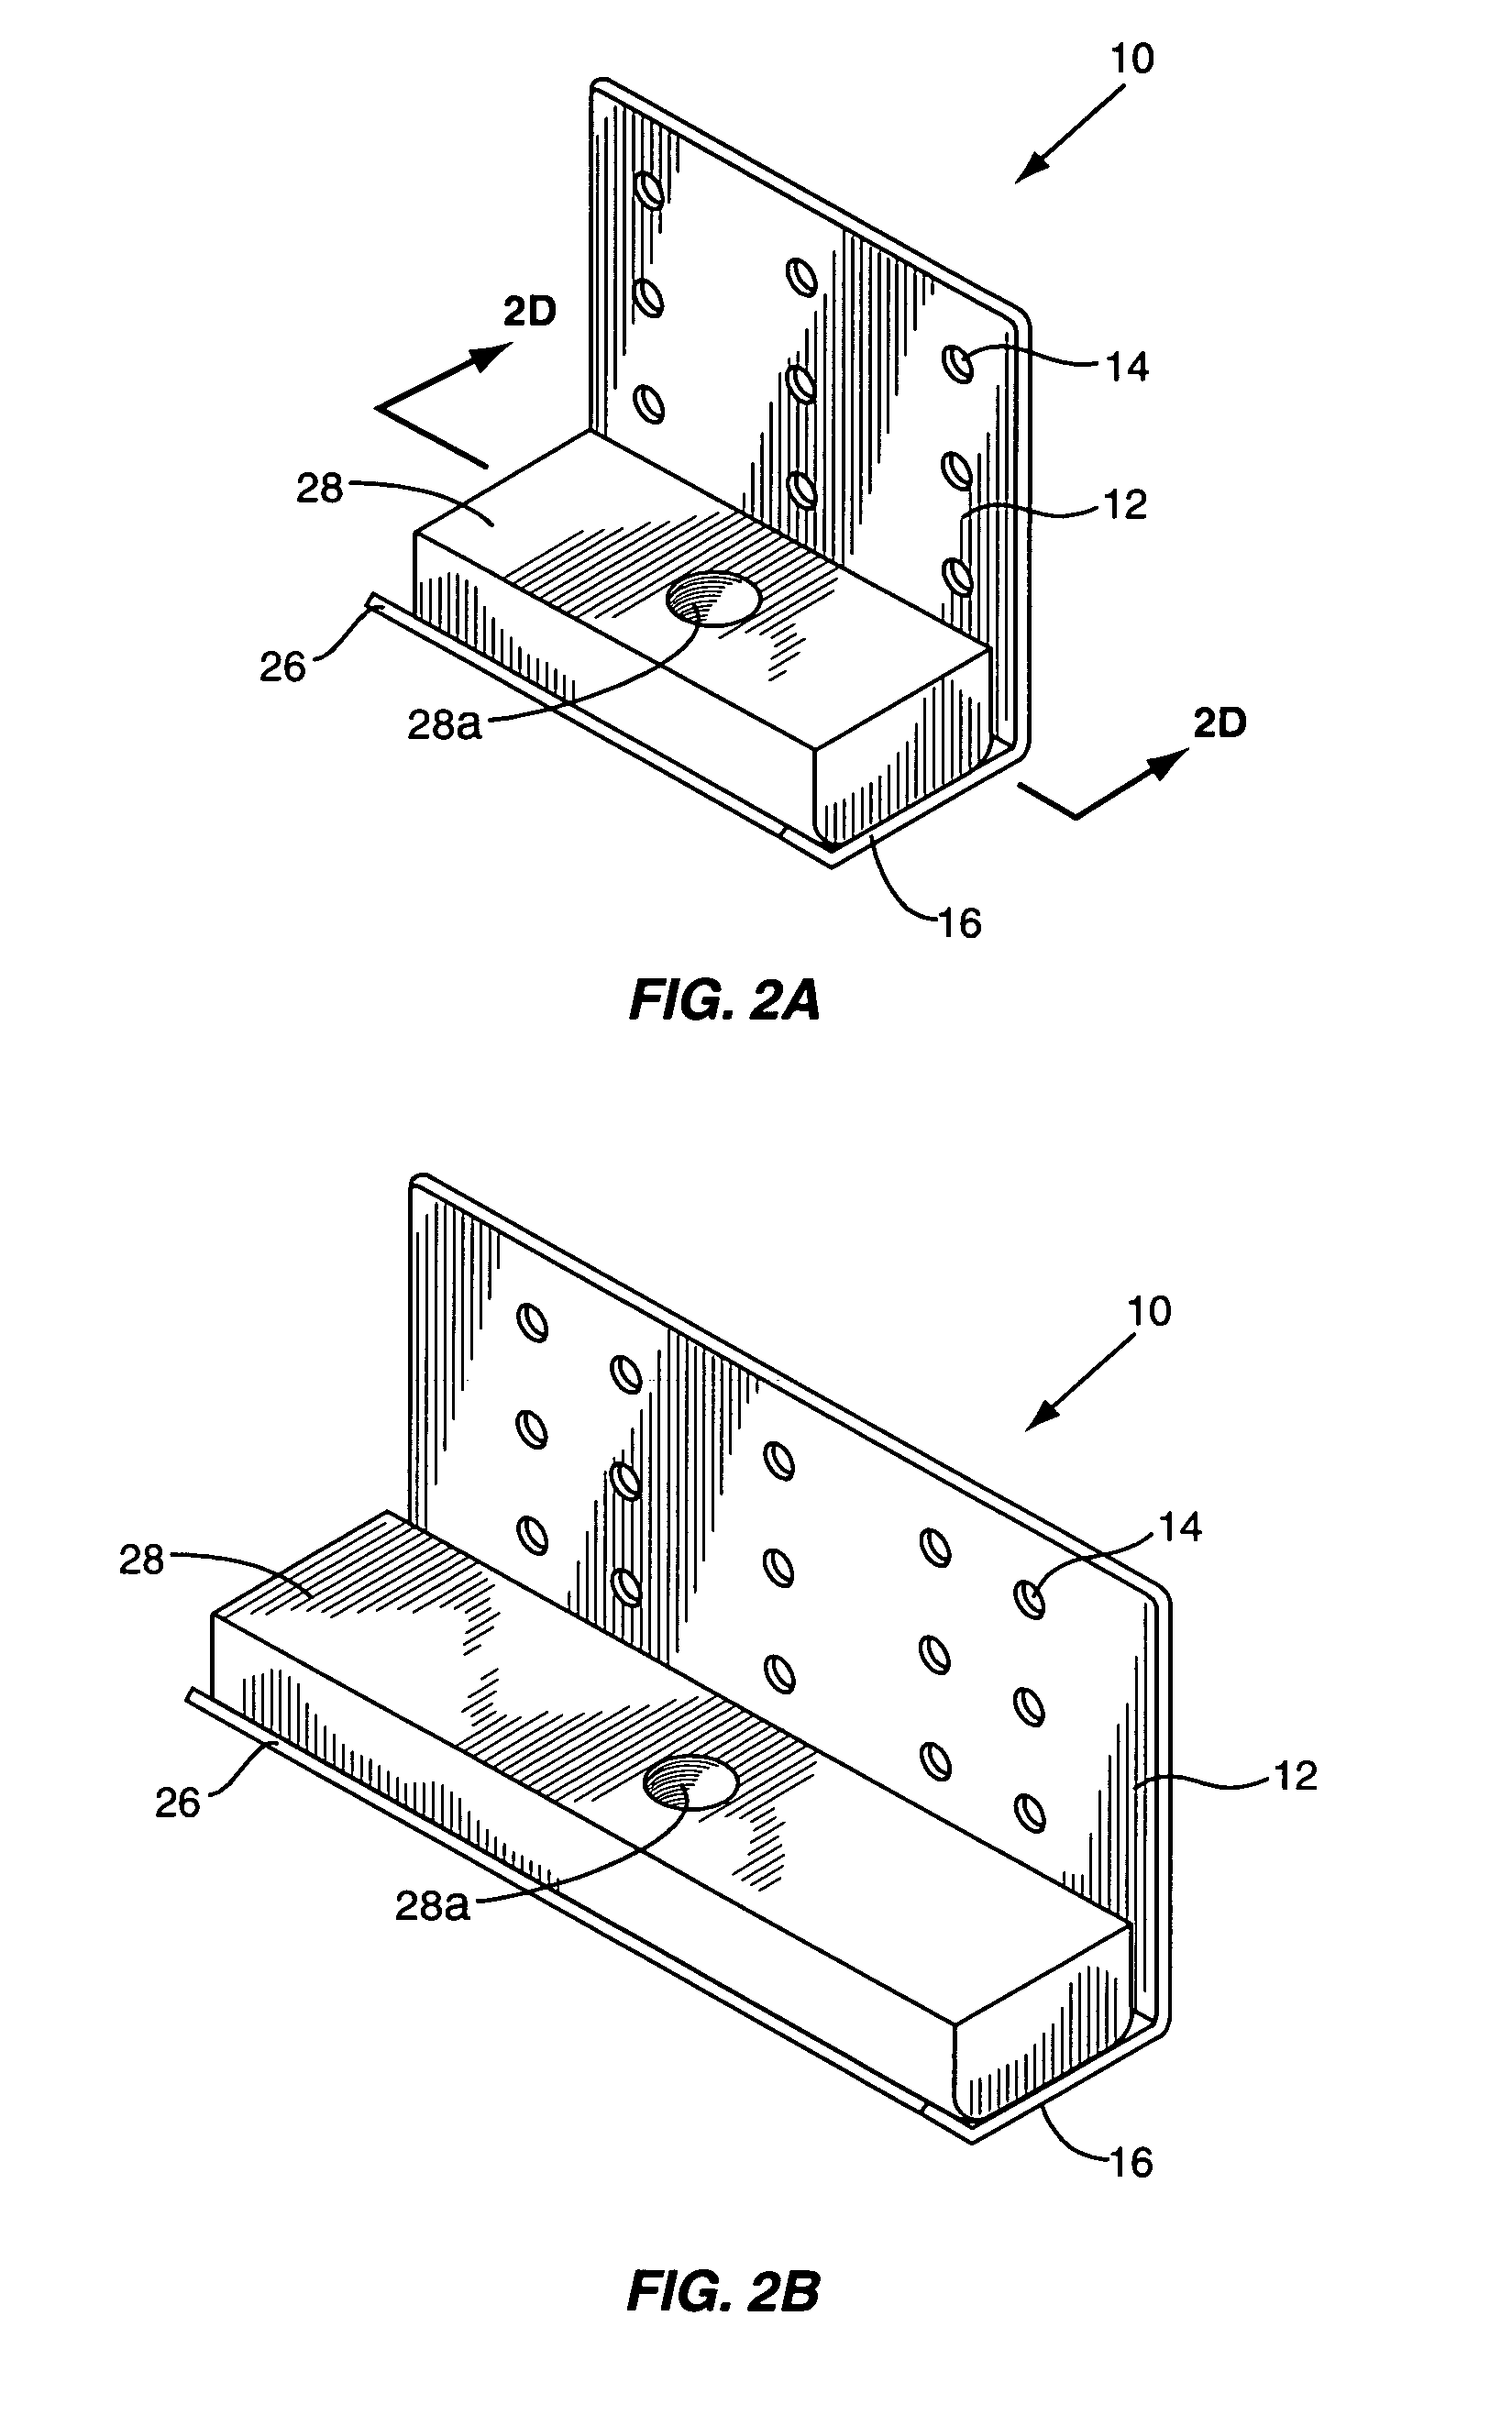 Connector for connecting building components